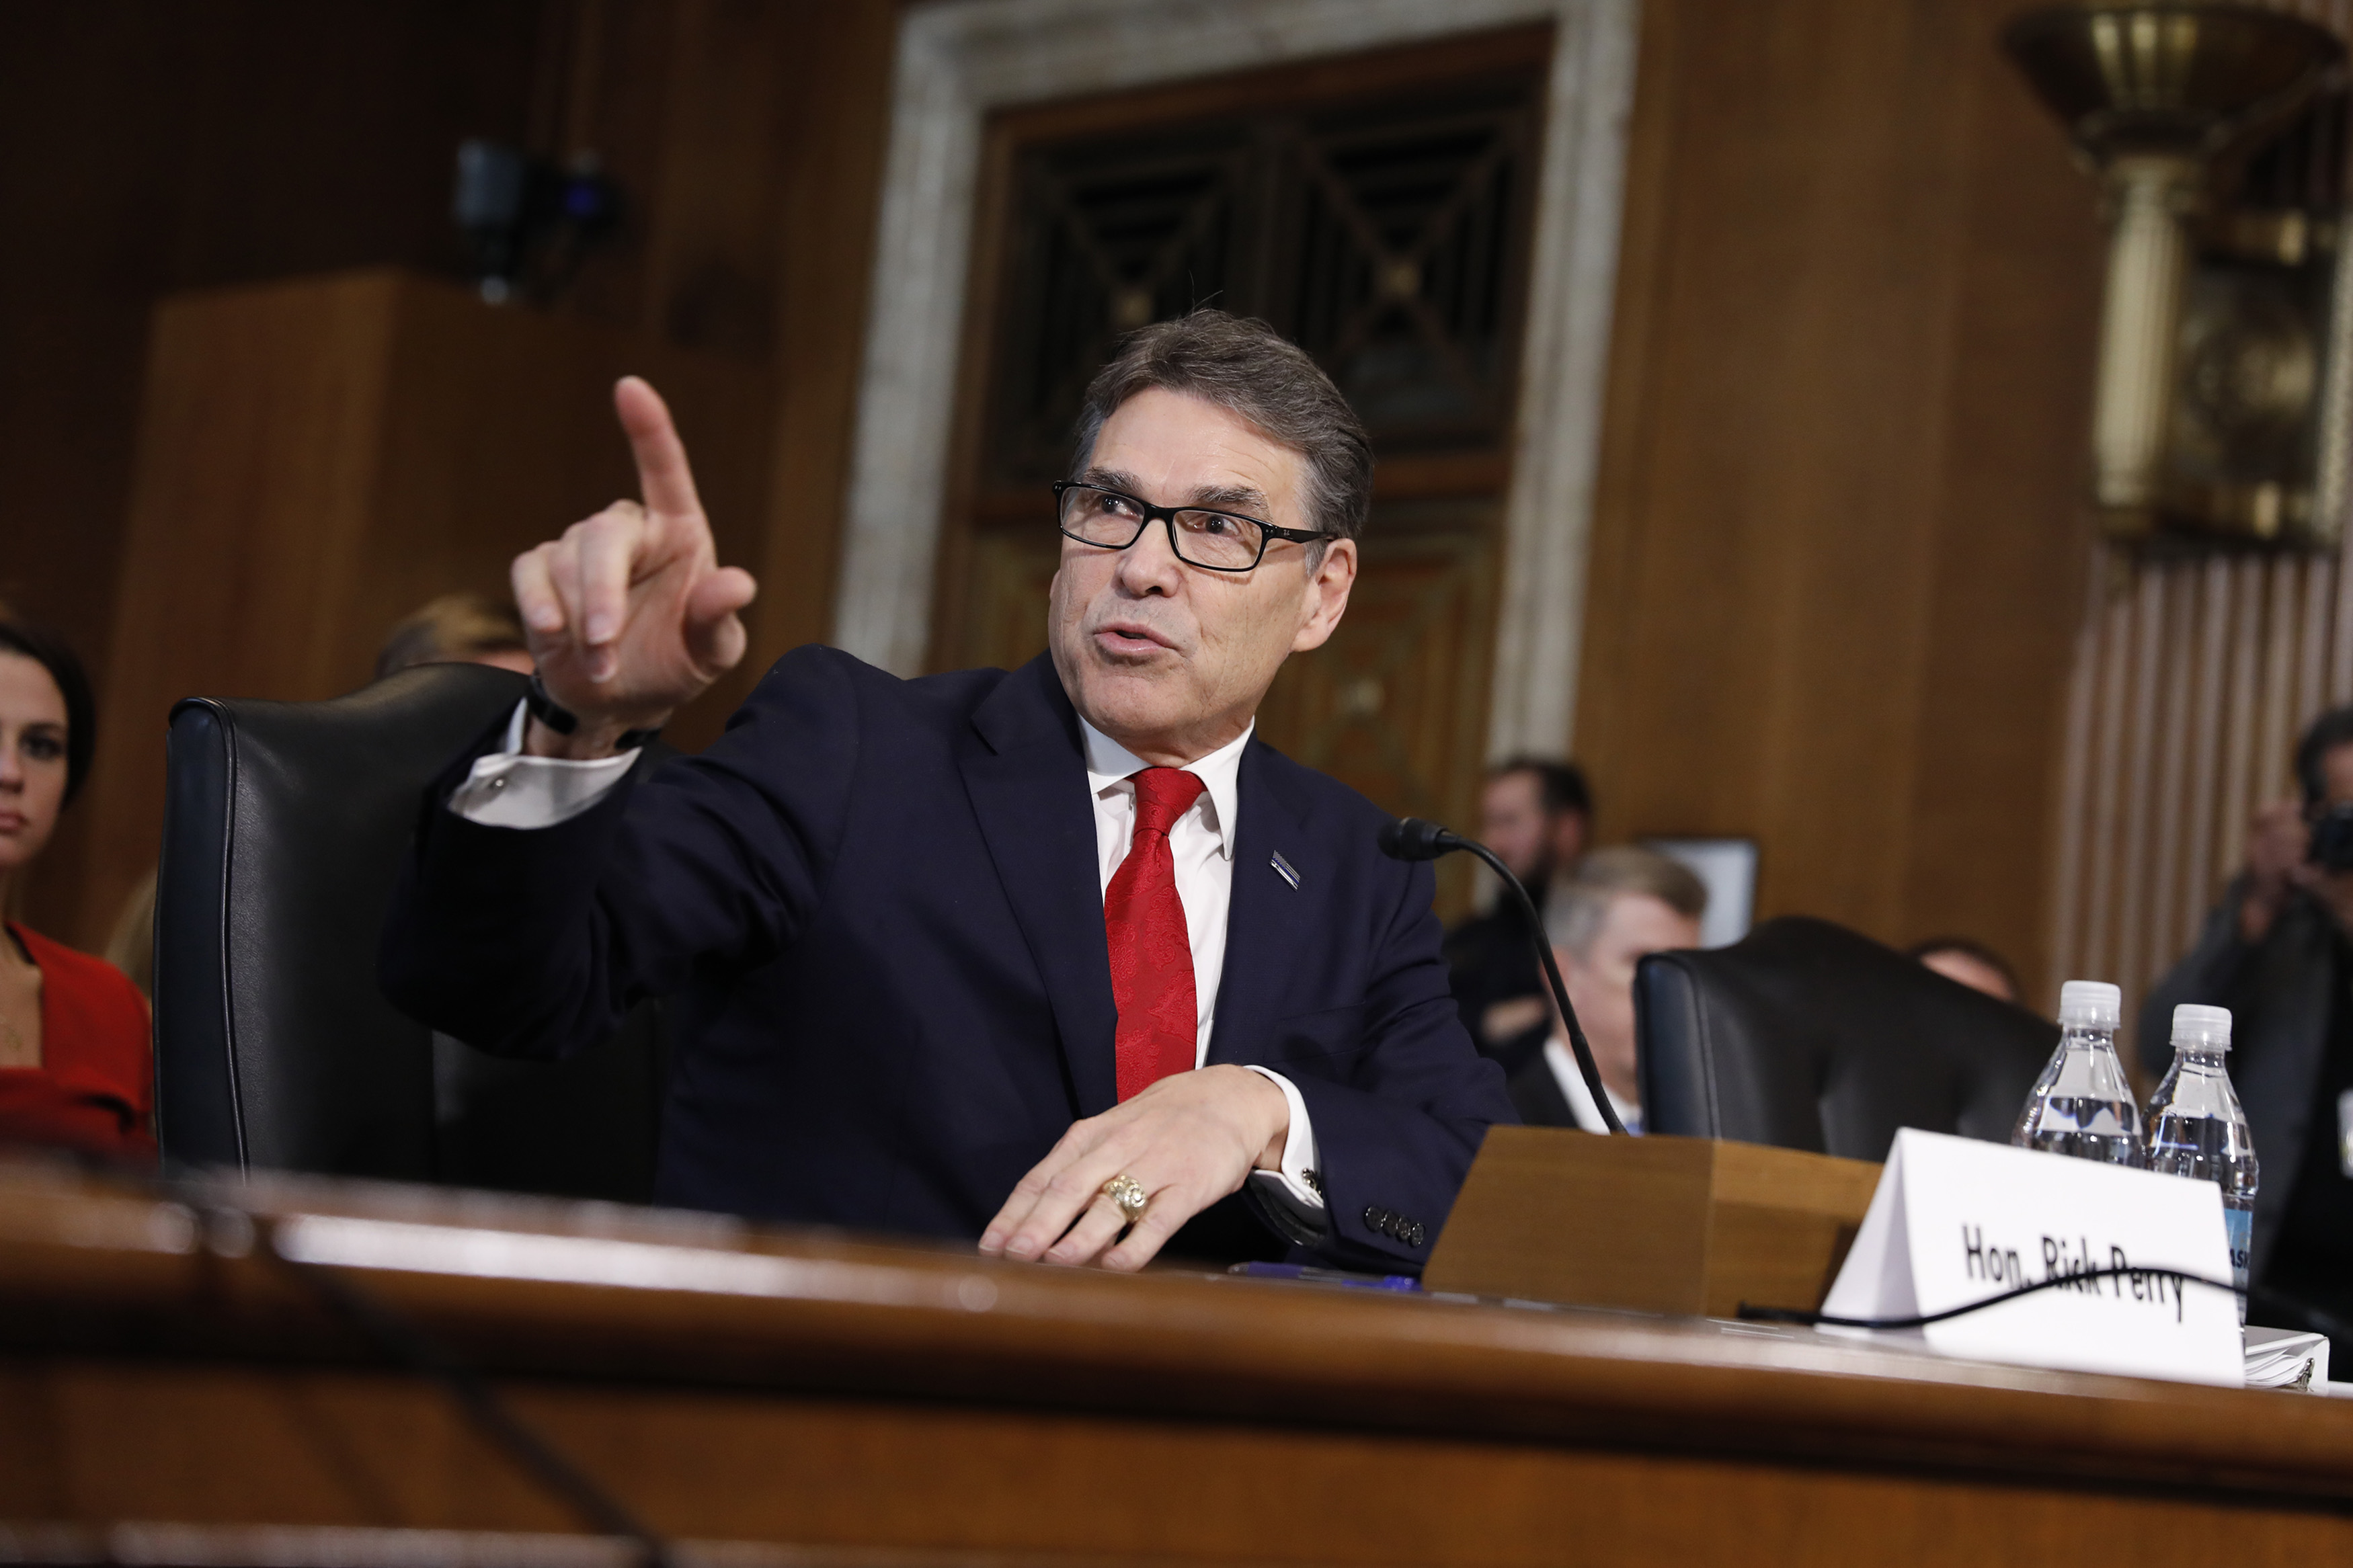 Former Texas Governor Rick Perry testifies during his confirmation hearing before the Senate Committee on Energy and Natural Resources on Capitol Hill January 19, 2017 in Washington, DC. (Aaron P. Bernstein—Getty Images)